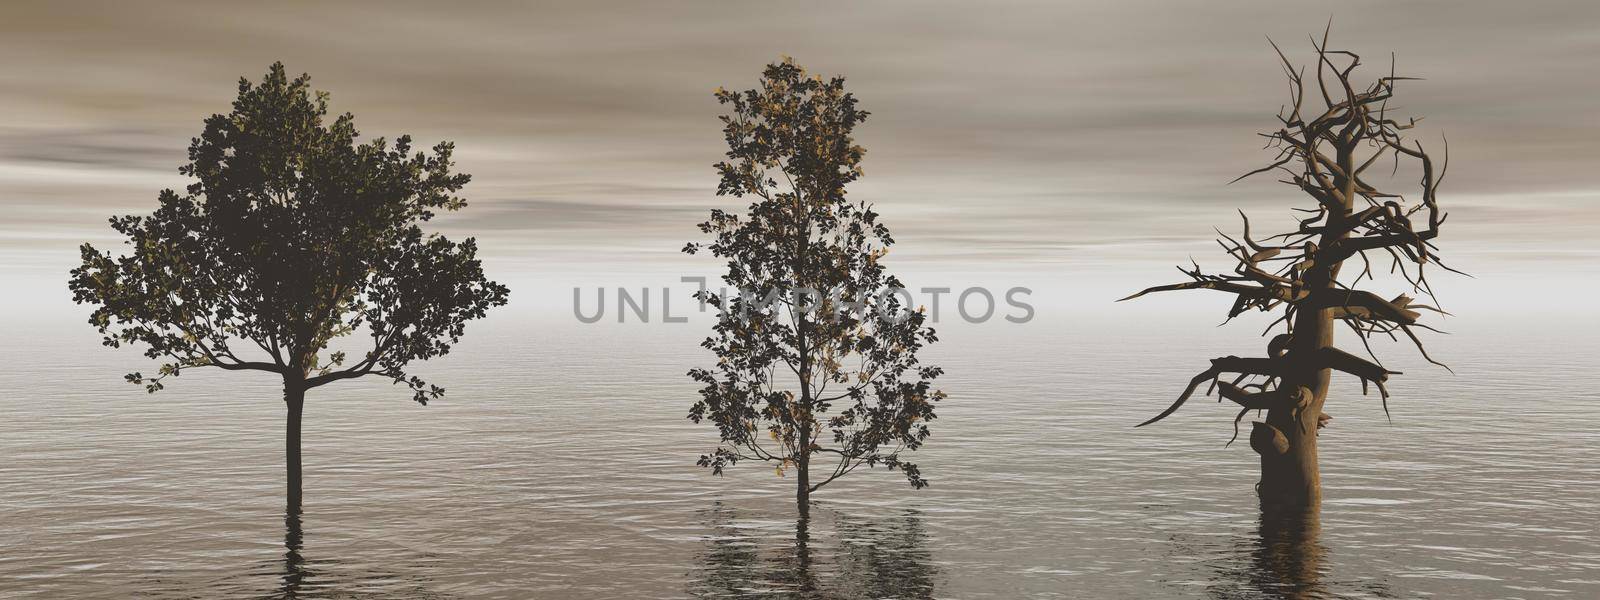 beautiful ocean view with two large trees - 3d rendering by mariephotos